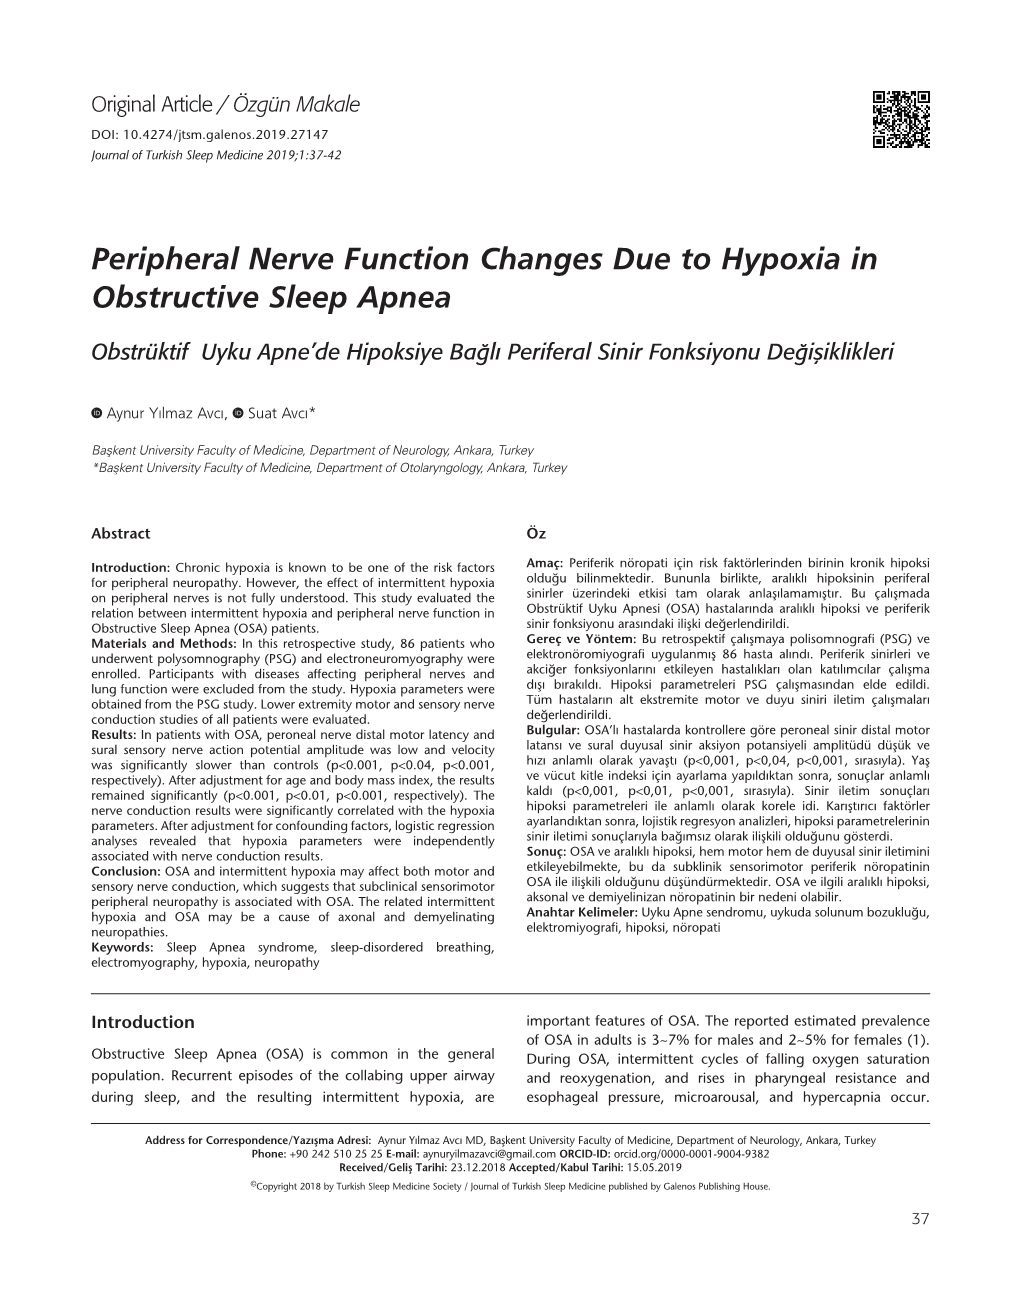 Peripheral Nerve Function Changes Due to Hypoxia in Obstructive Sleep Apnea